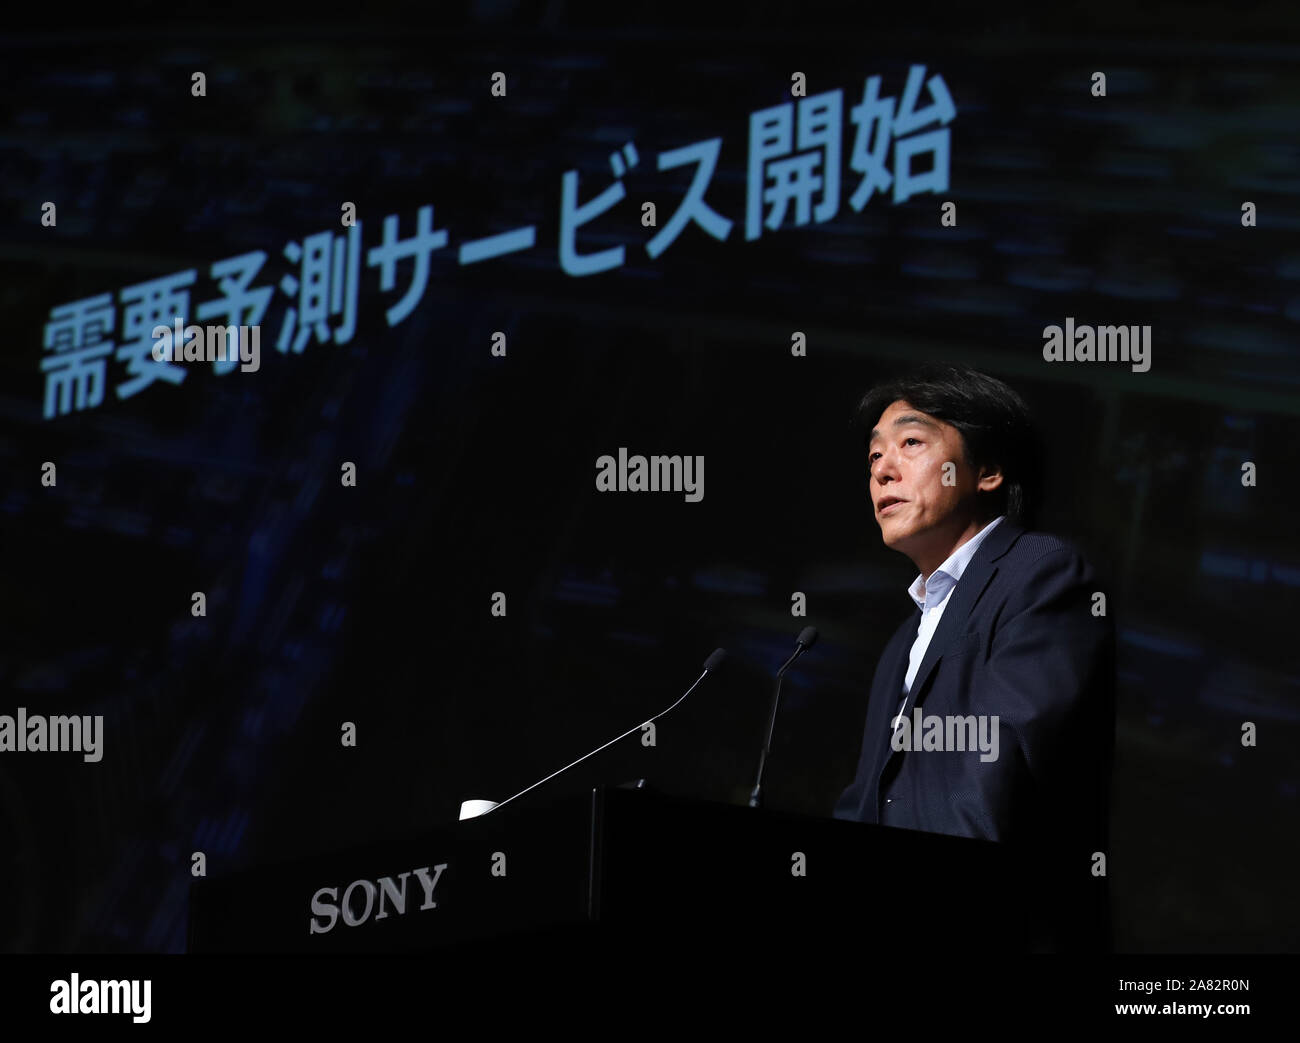 Tokyo, Japan. 5th Nov, 2019. Sony's executive officer Izumi Kawanishi announces they will provide taxi demand prediction service using Sony's AI and other technologies to taxi hailing service company Minnano Taxi, which is joint venture of Sony, taxi companies and others at Sony's headquarters in Tokyo on Tuesday, November 5, 2019. Sony already provided taxi dispatch app S.RIDE to the company. Credit: Yoshio Tsunoda/AFLO/Alamy Live News Stock Photo